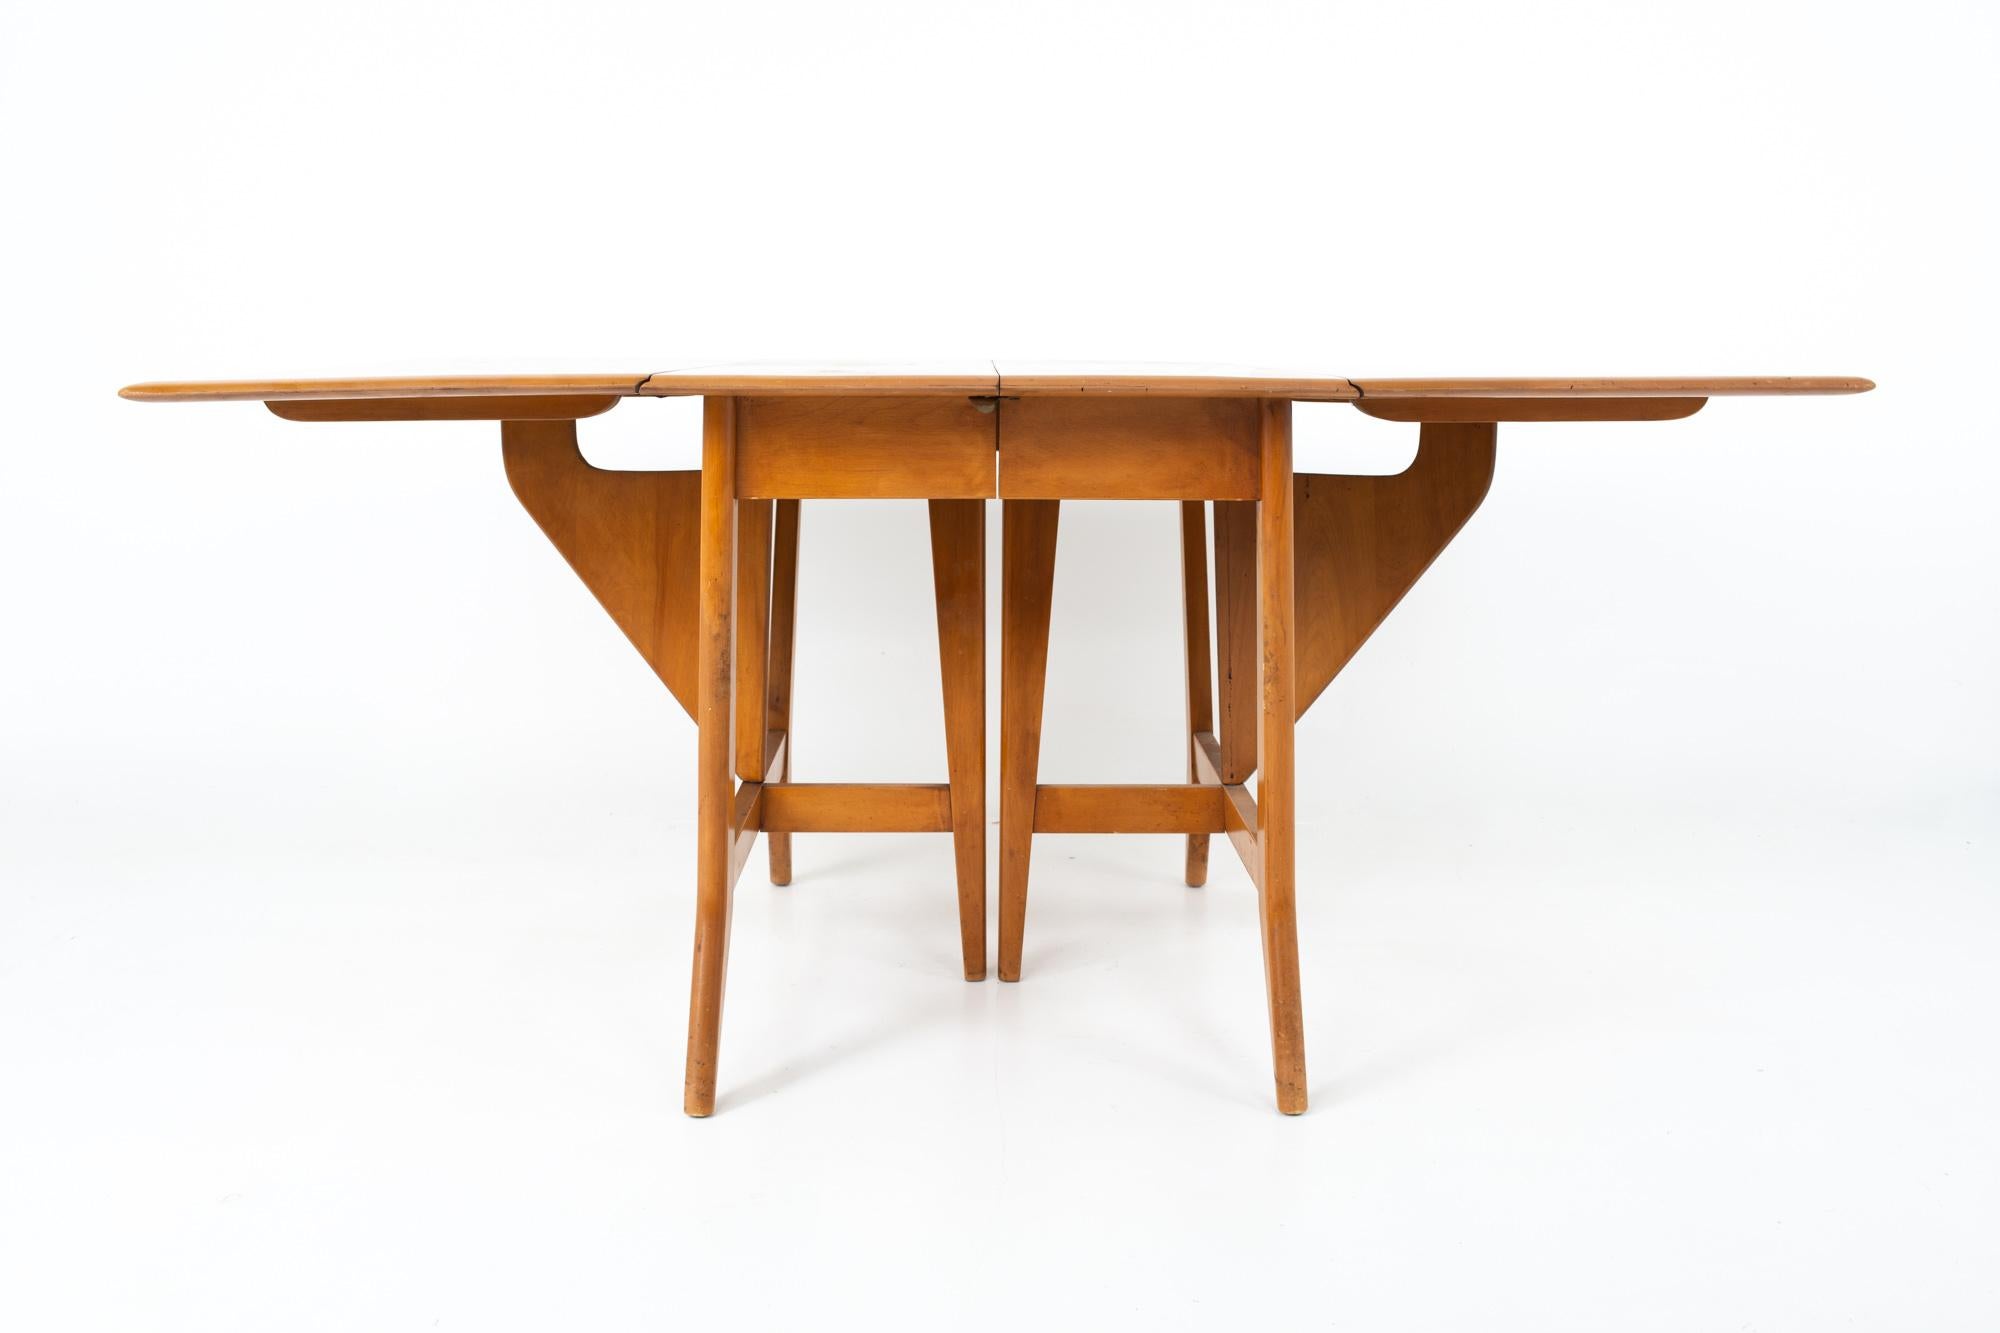 Mid Century drop-leaf dining table.
Table measures: 63.25 wide x 42 deep x 29 high; each leaf measures 10 inches wide

This piece is available in what we call restored vintage condition. Upon purchase it is fixed so it’s free of watermarks, chips or